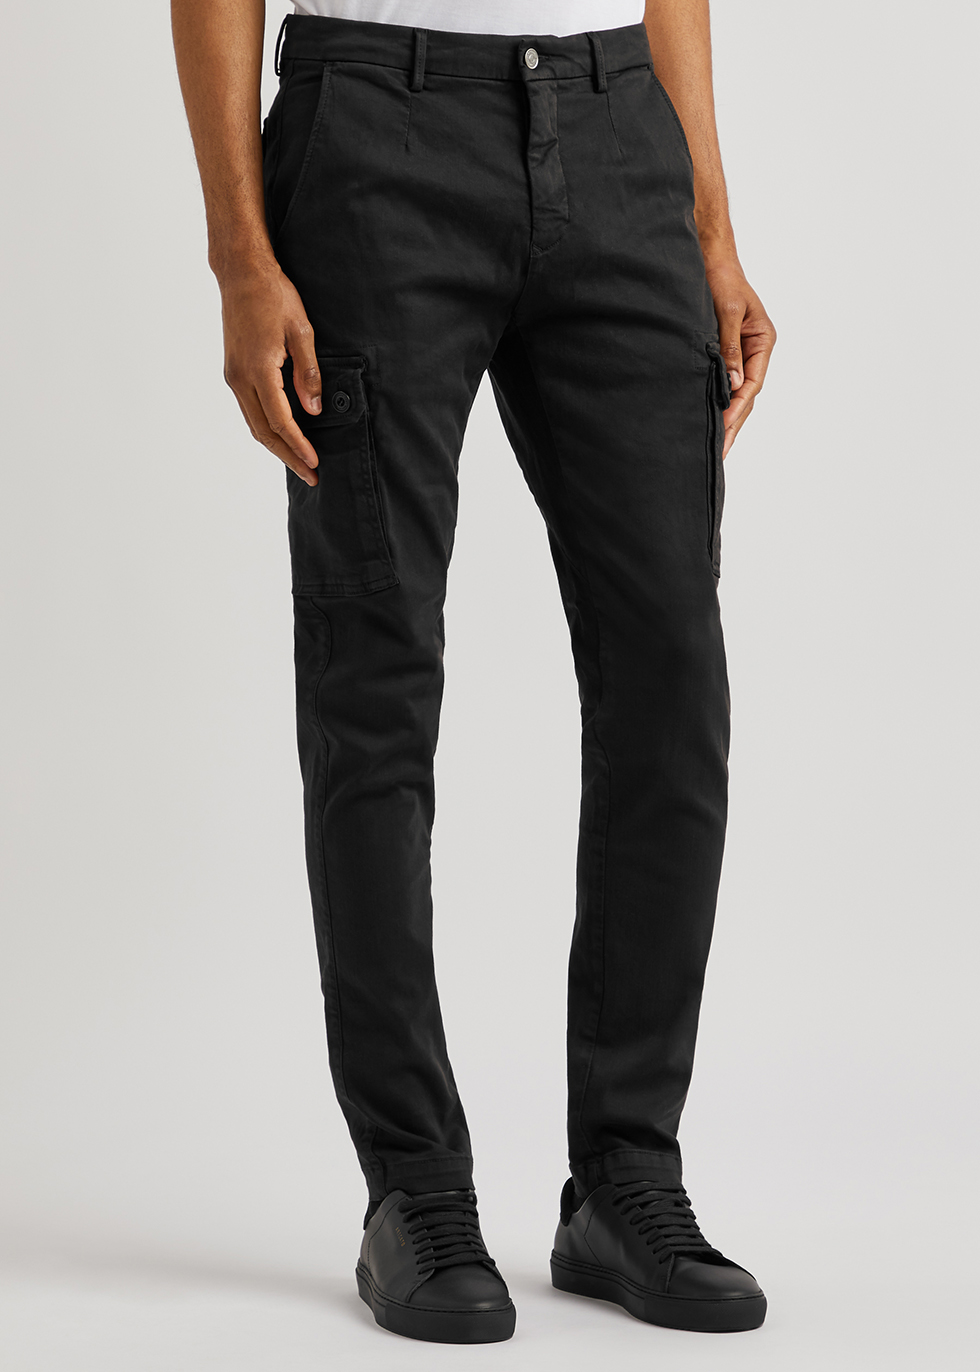 Replay  Replay Joe Cargo Pant S00  Cargo Trousers  House of Fraser